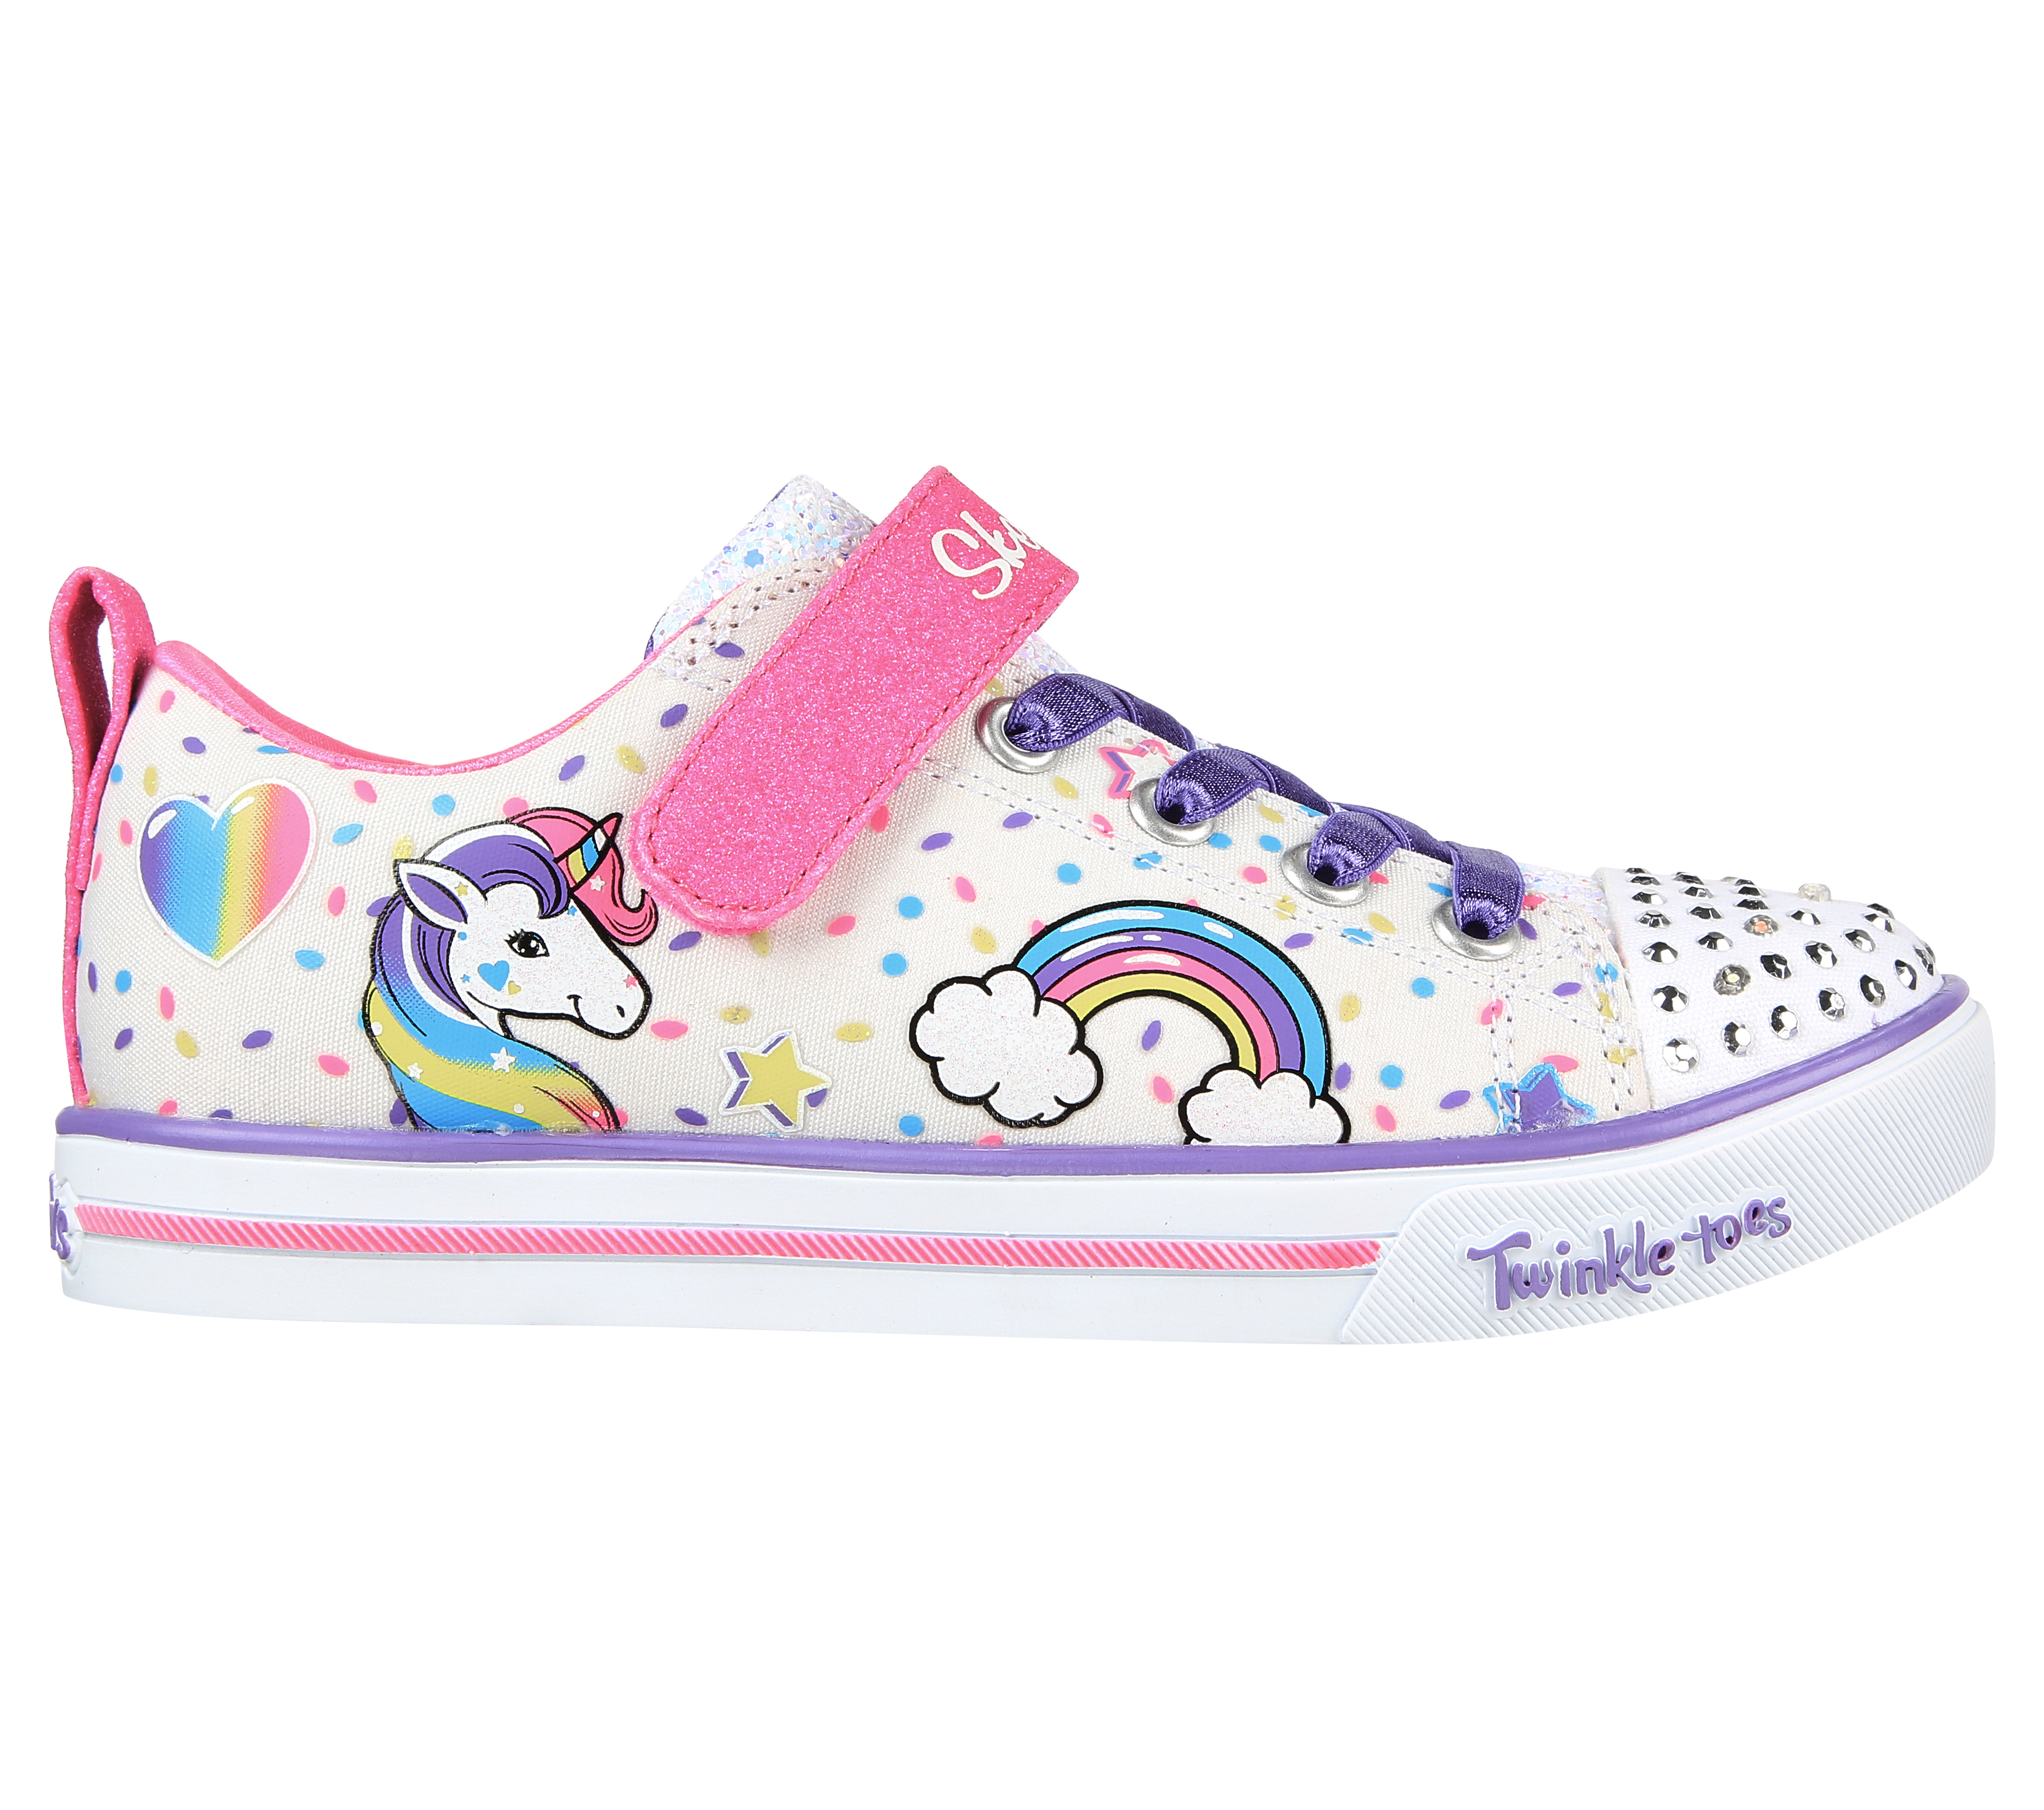 where can i buy twinkle toes by skechers